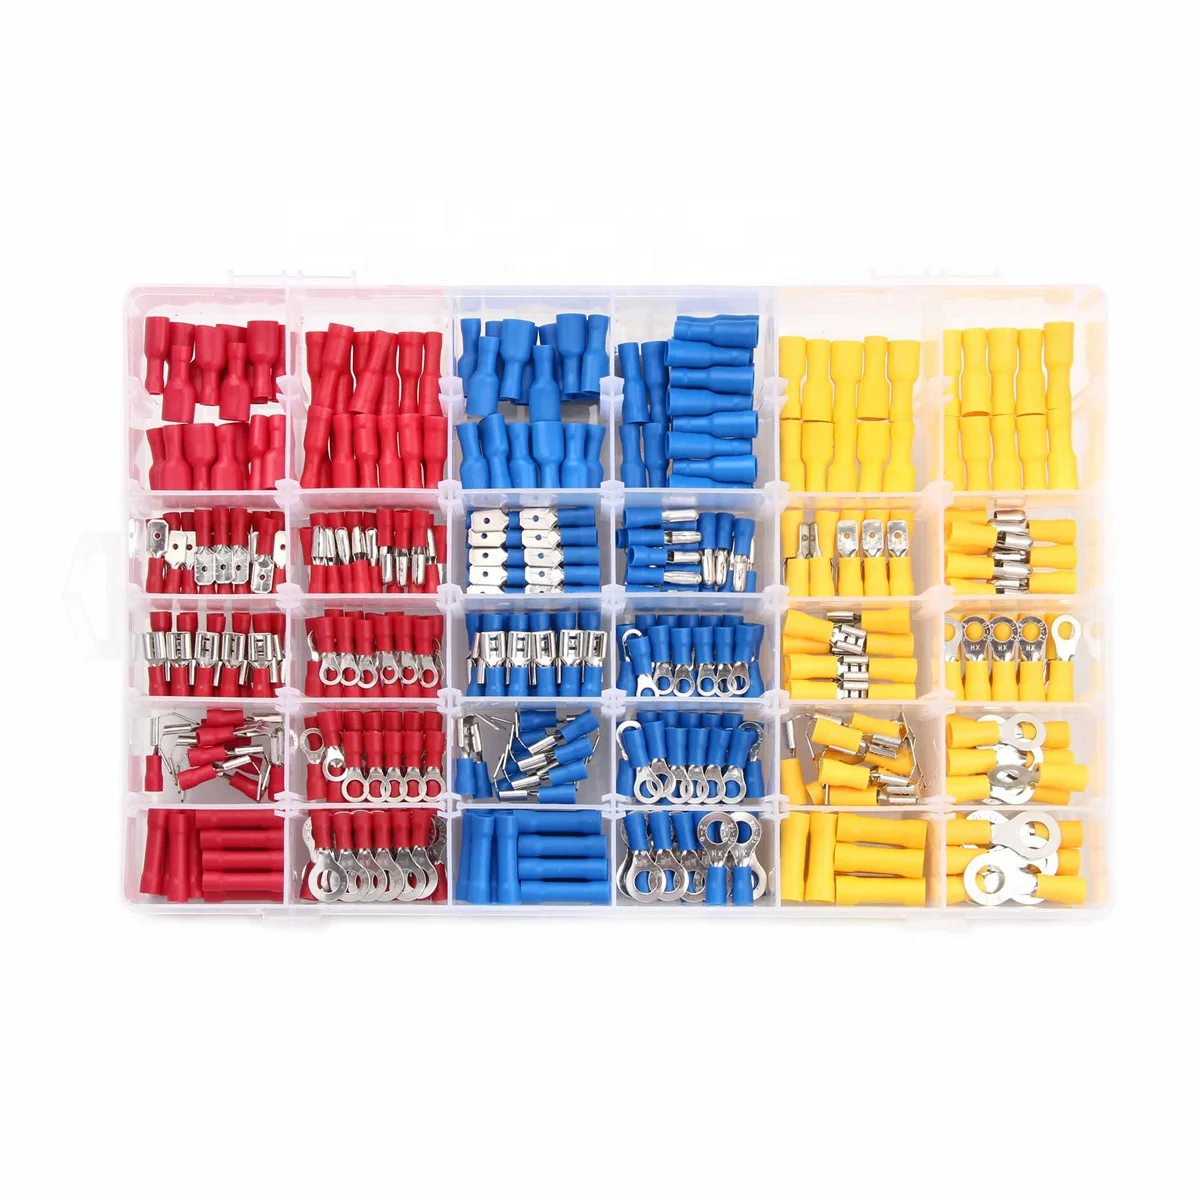 Wire Terminals Kit,480Pcs Insulated Butt Bullet Spade Ring Crimp Terminal Connector 480pcs 